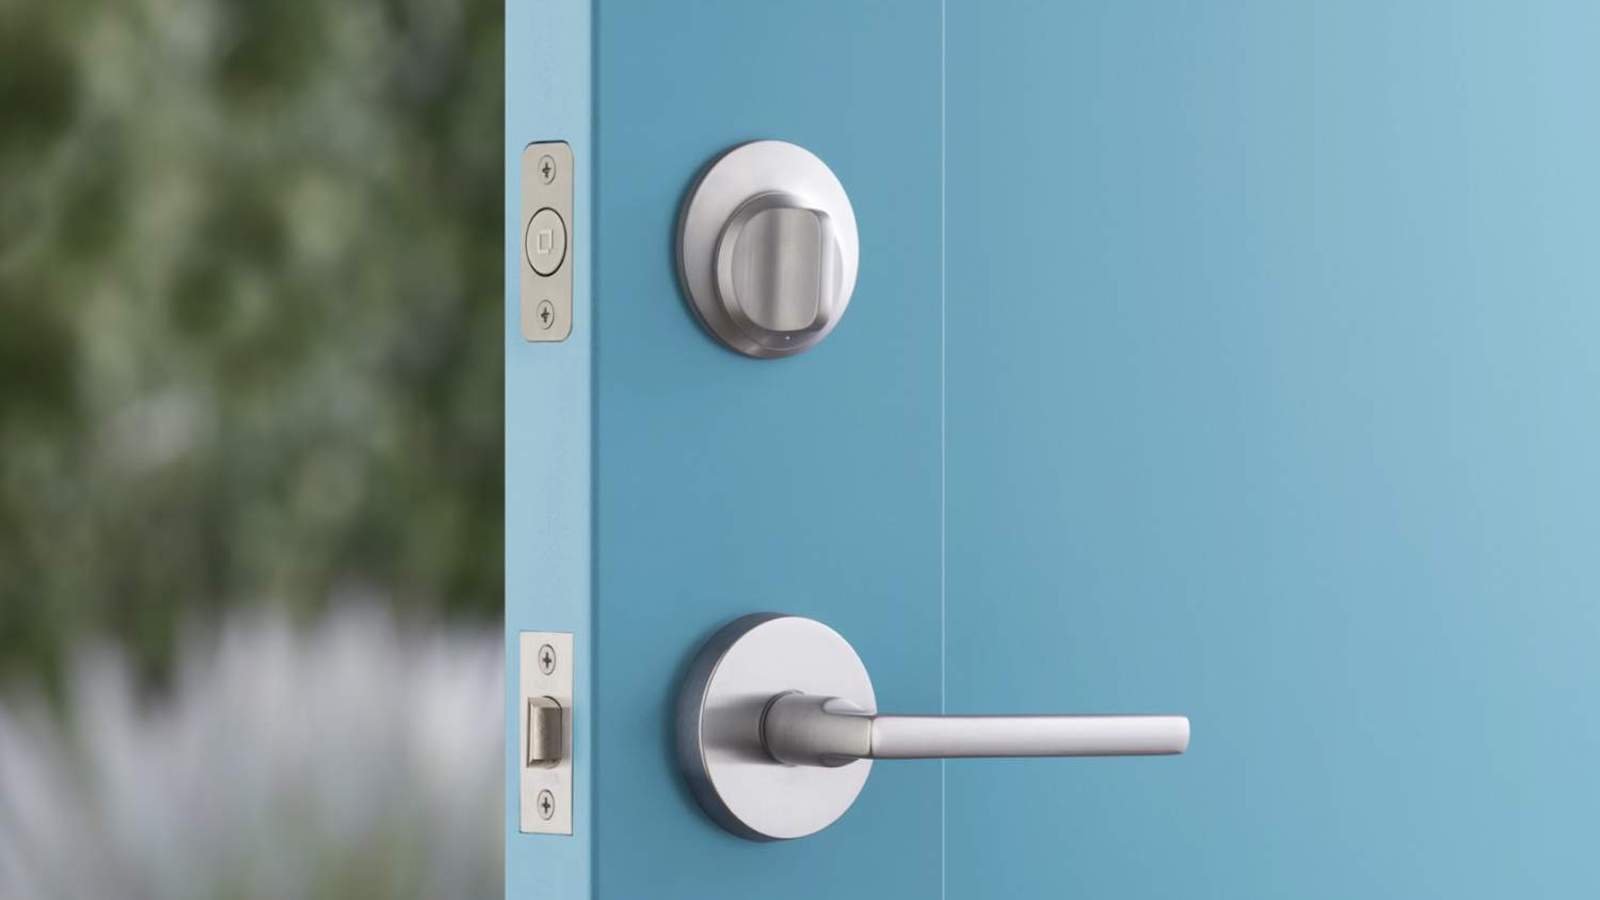 Level Lock invisible smart lock transforms your standard door lock into a smart one